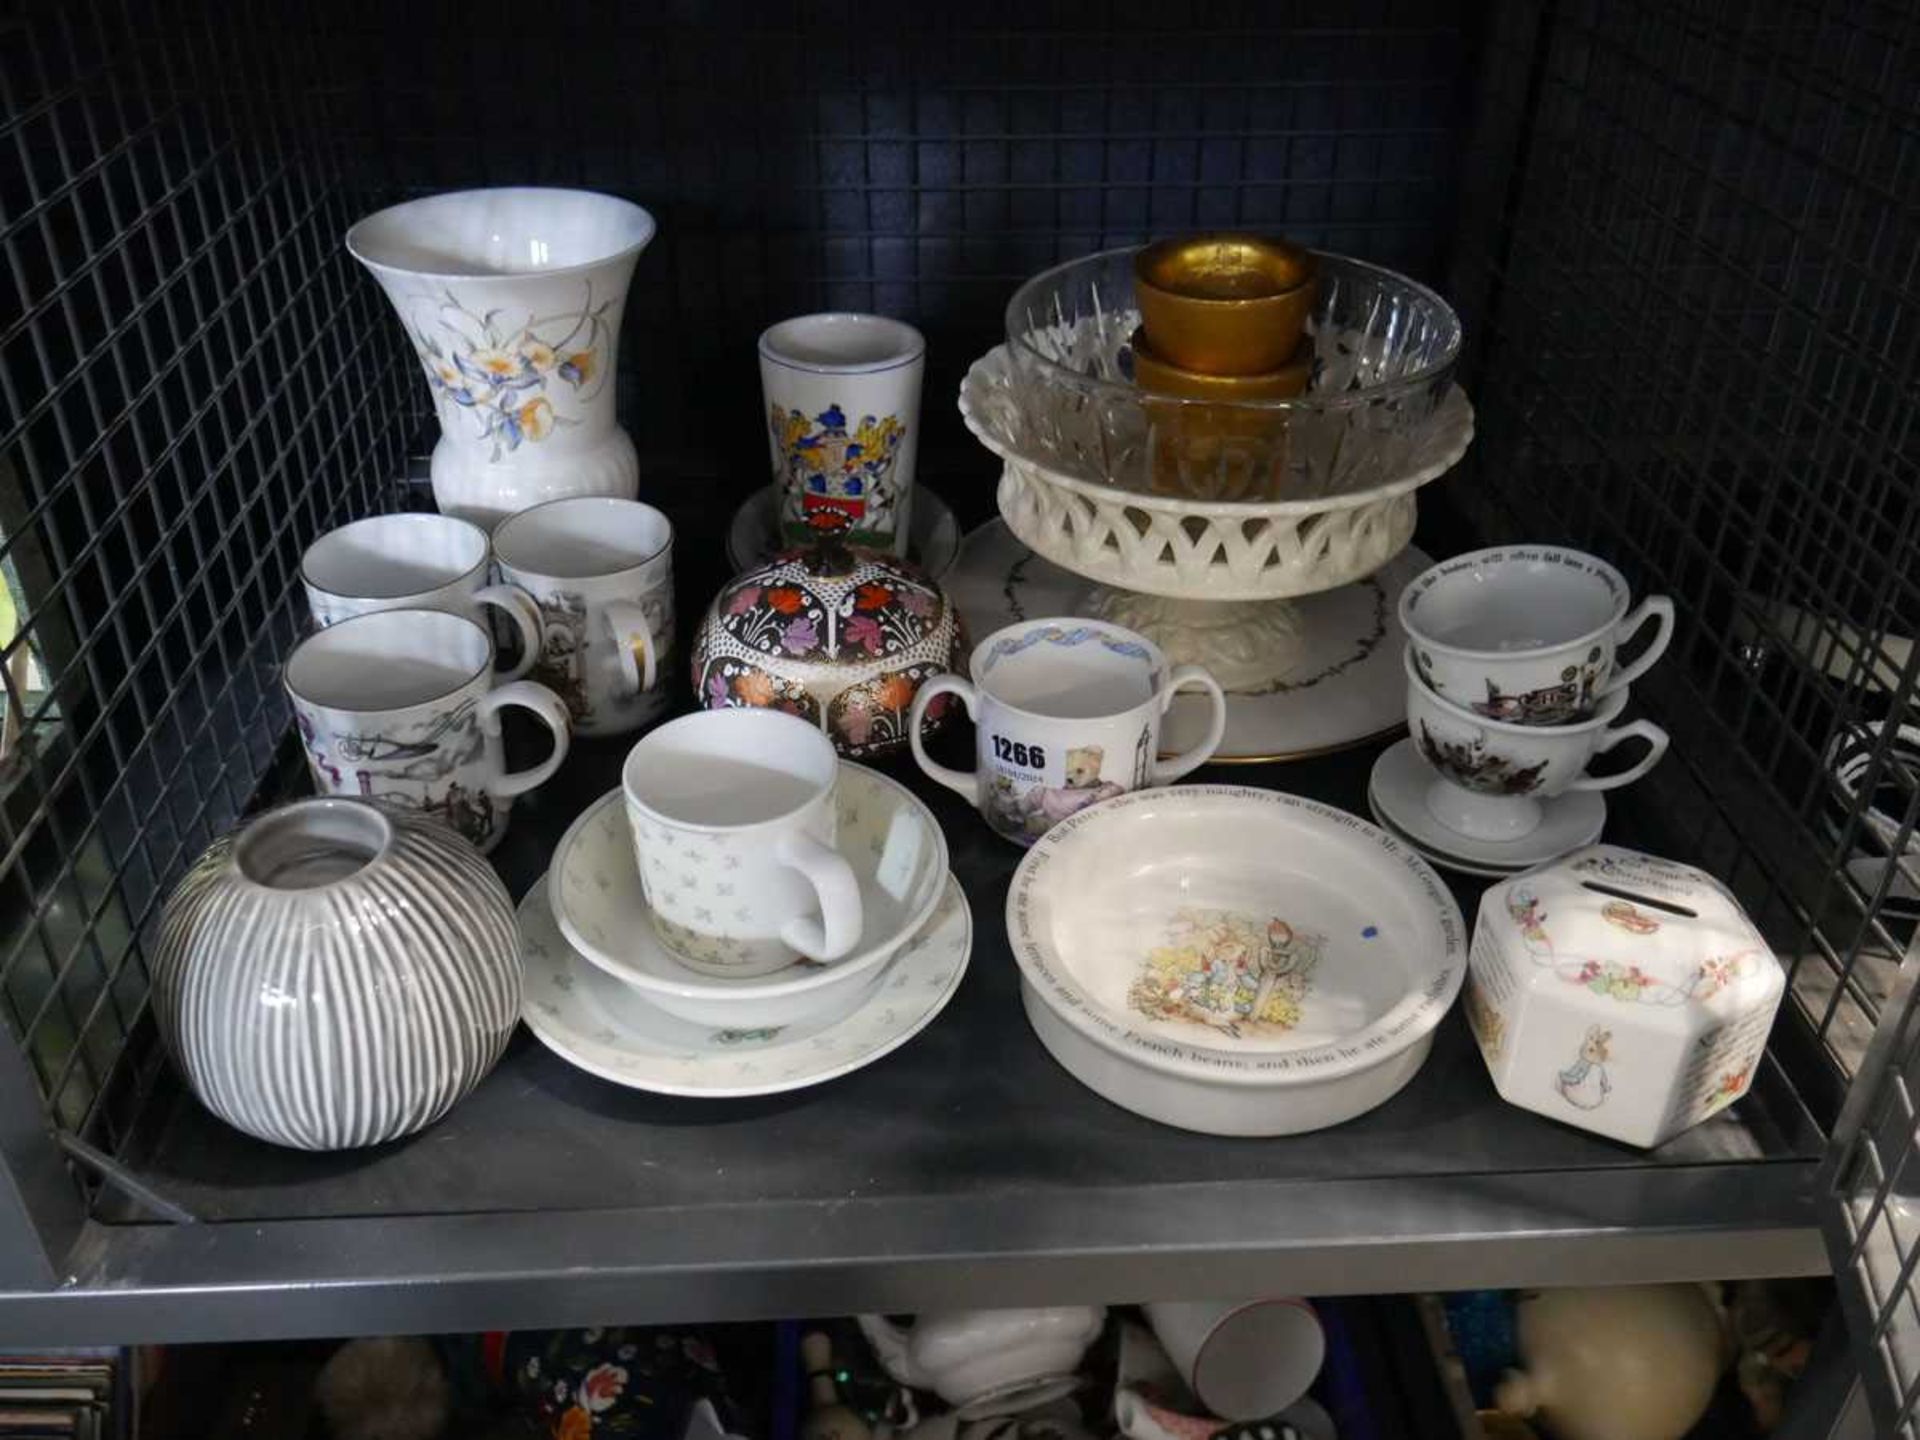 Cage containing various Royal Worcester cups, Wedgewood Peter Rabbit bowls, money boxes and other